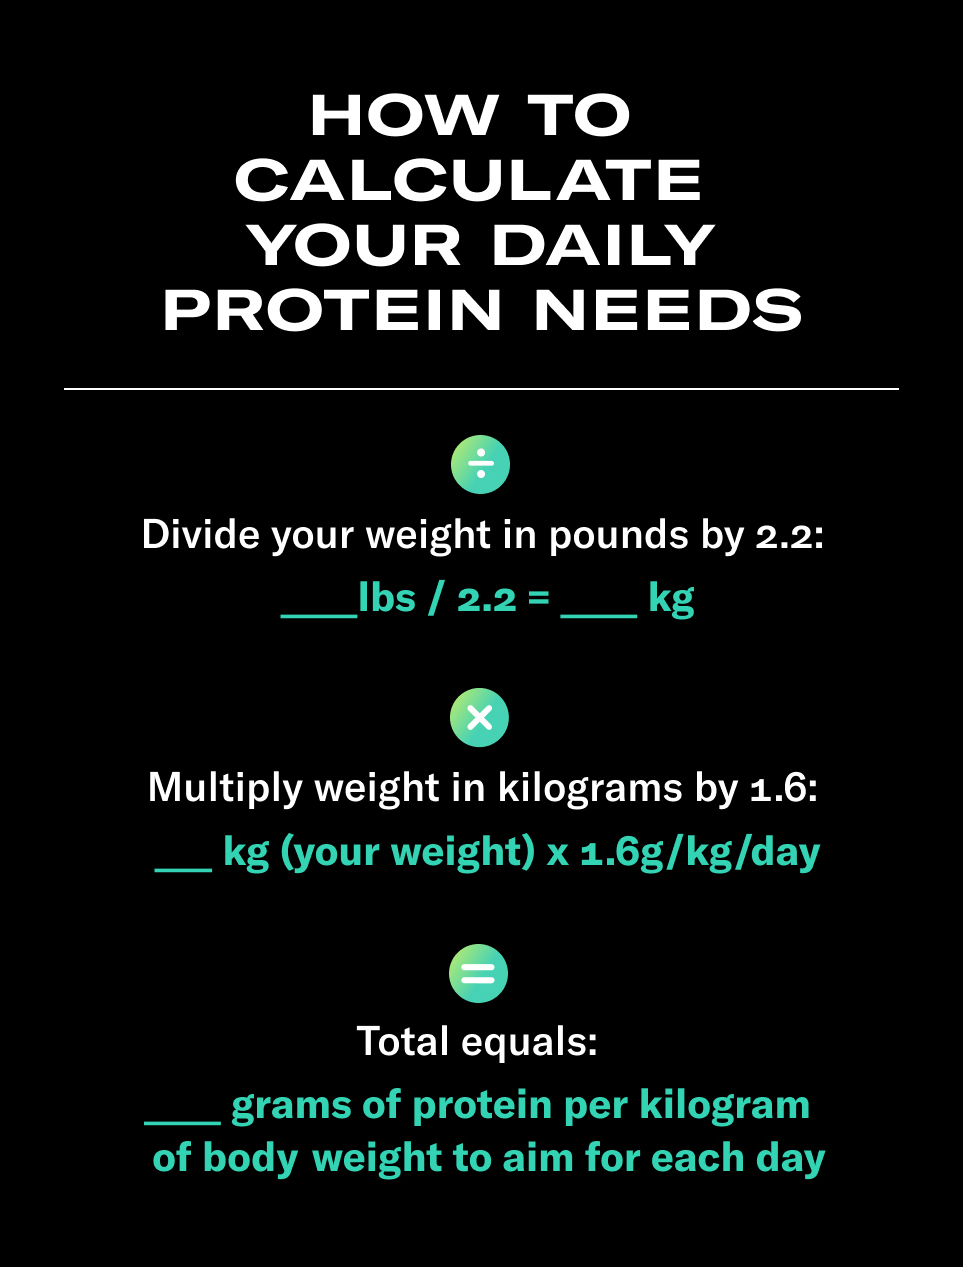 chart detailing how to calculate your protein needs: divide your weight in pounds by 2.2 then multiply that by 1.6 to get the total